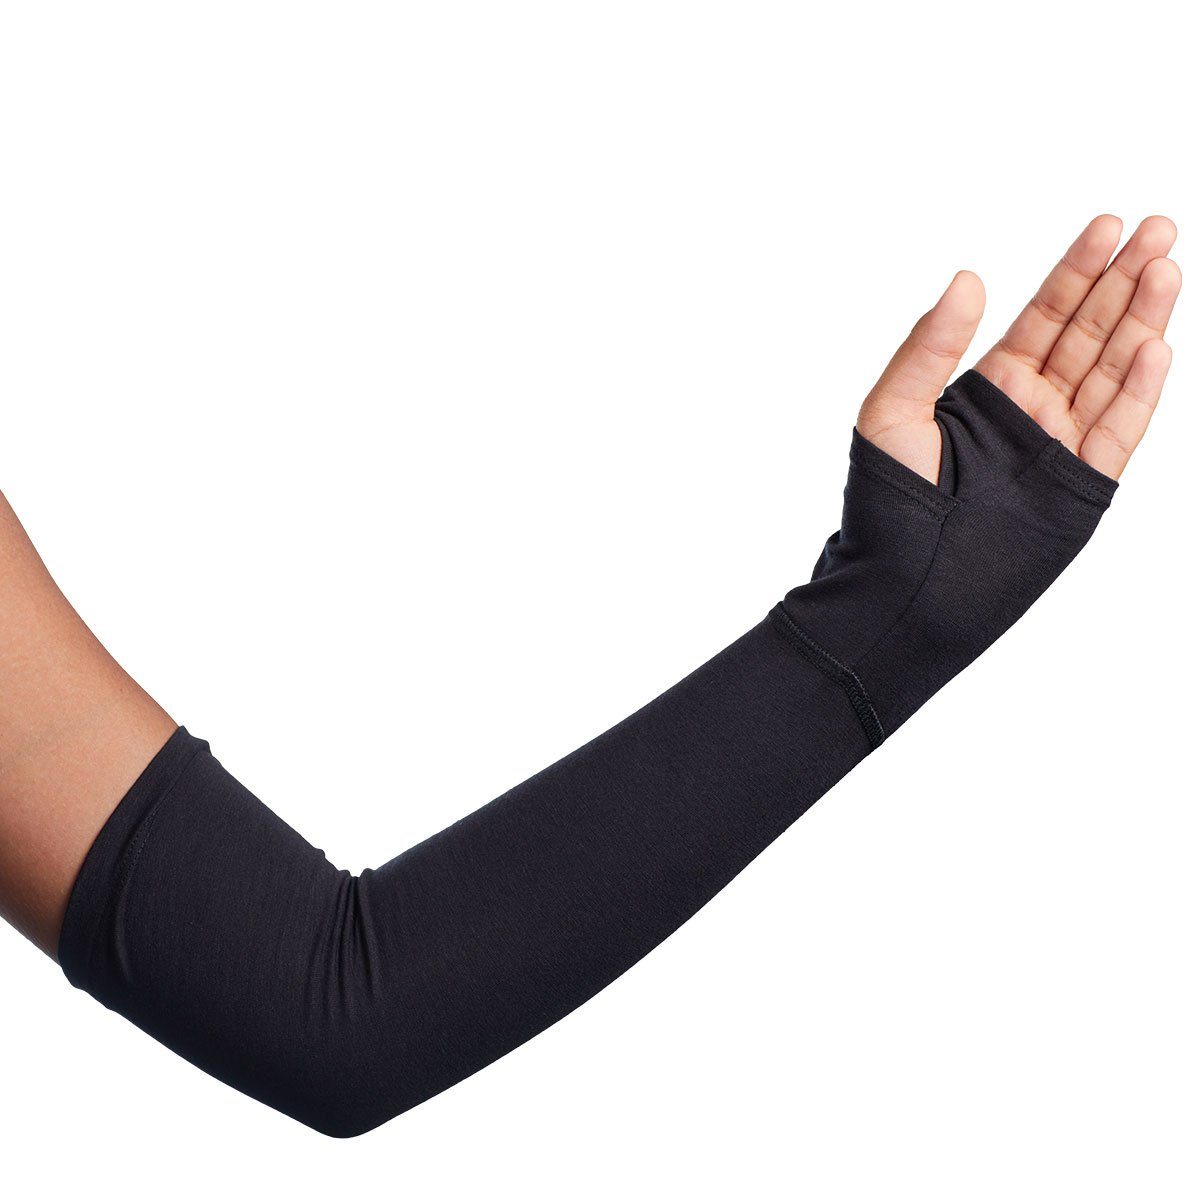 Buy Sun Sleeves With UPF 50+ Online In India - Lavos Performance.